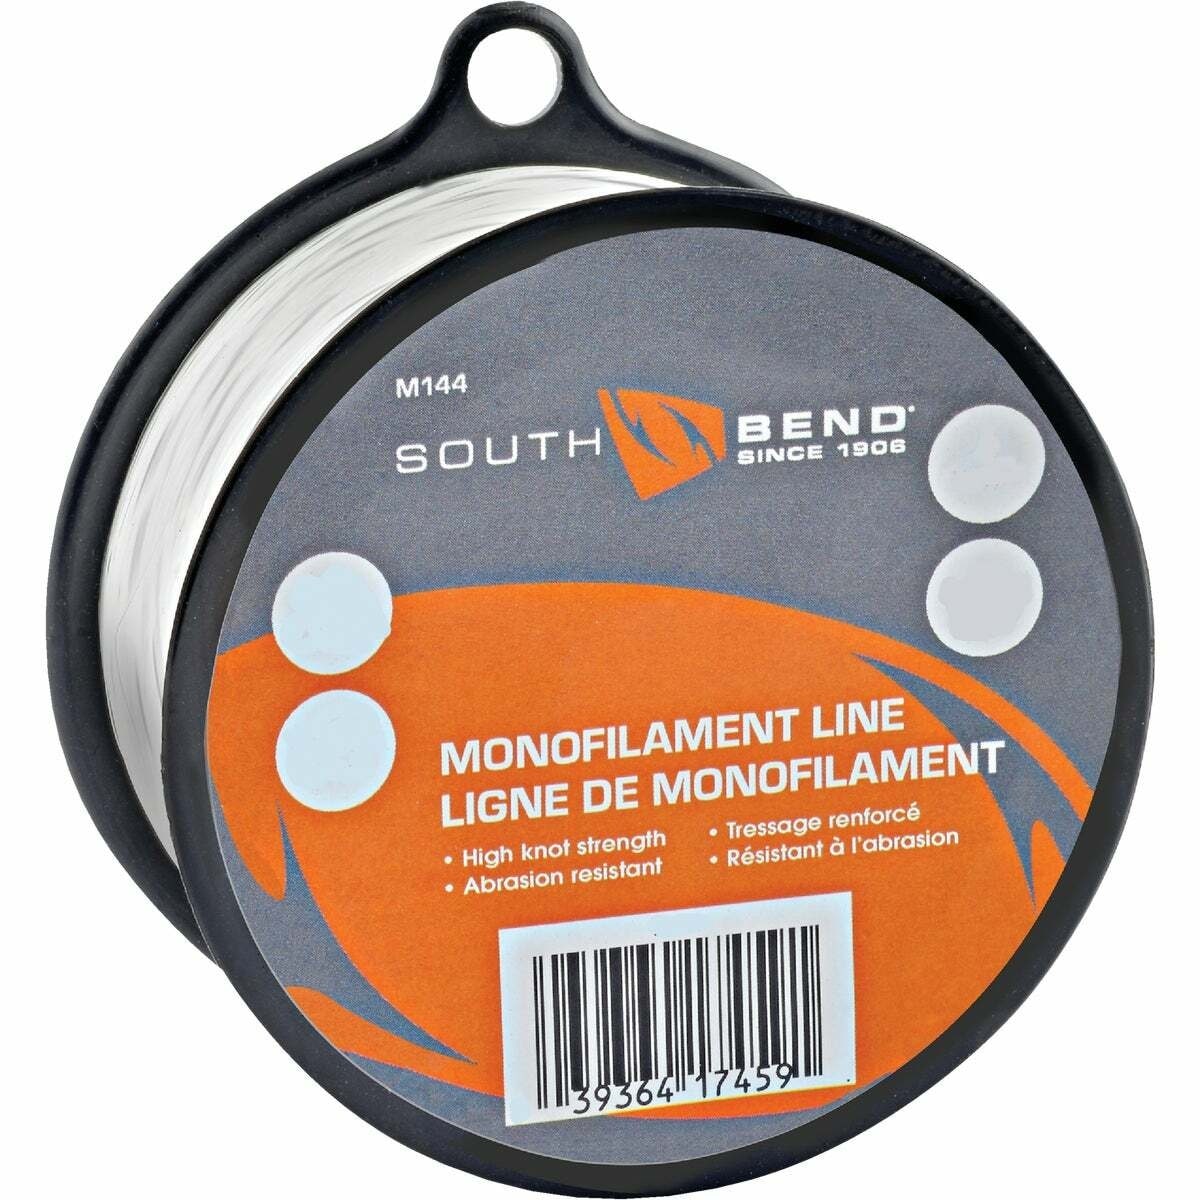 SouthBend 8 Lb. 765 Yd. Clear Monofilament Fishing Line - 1 Each